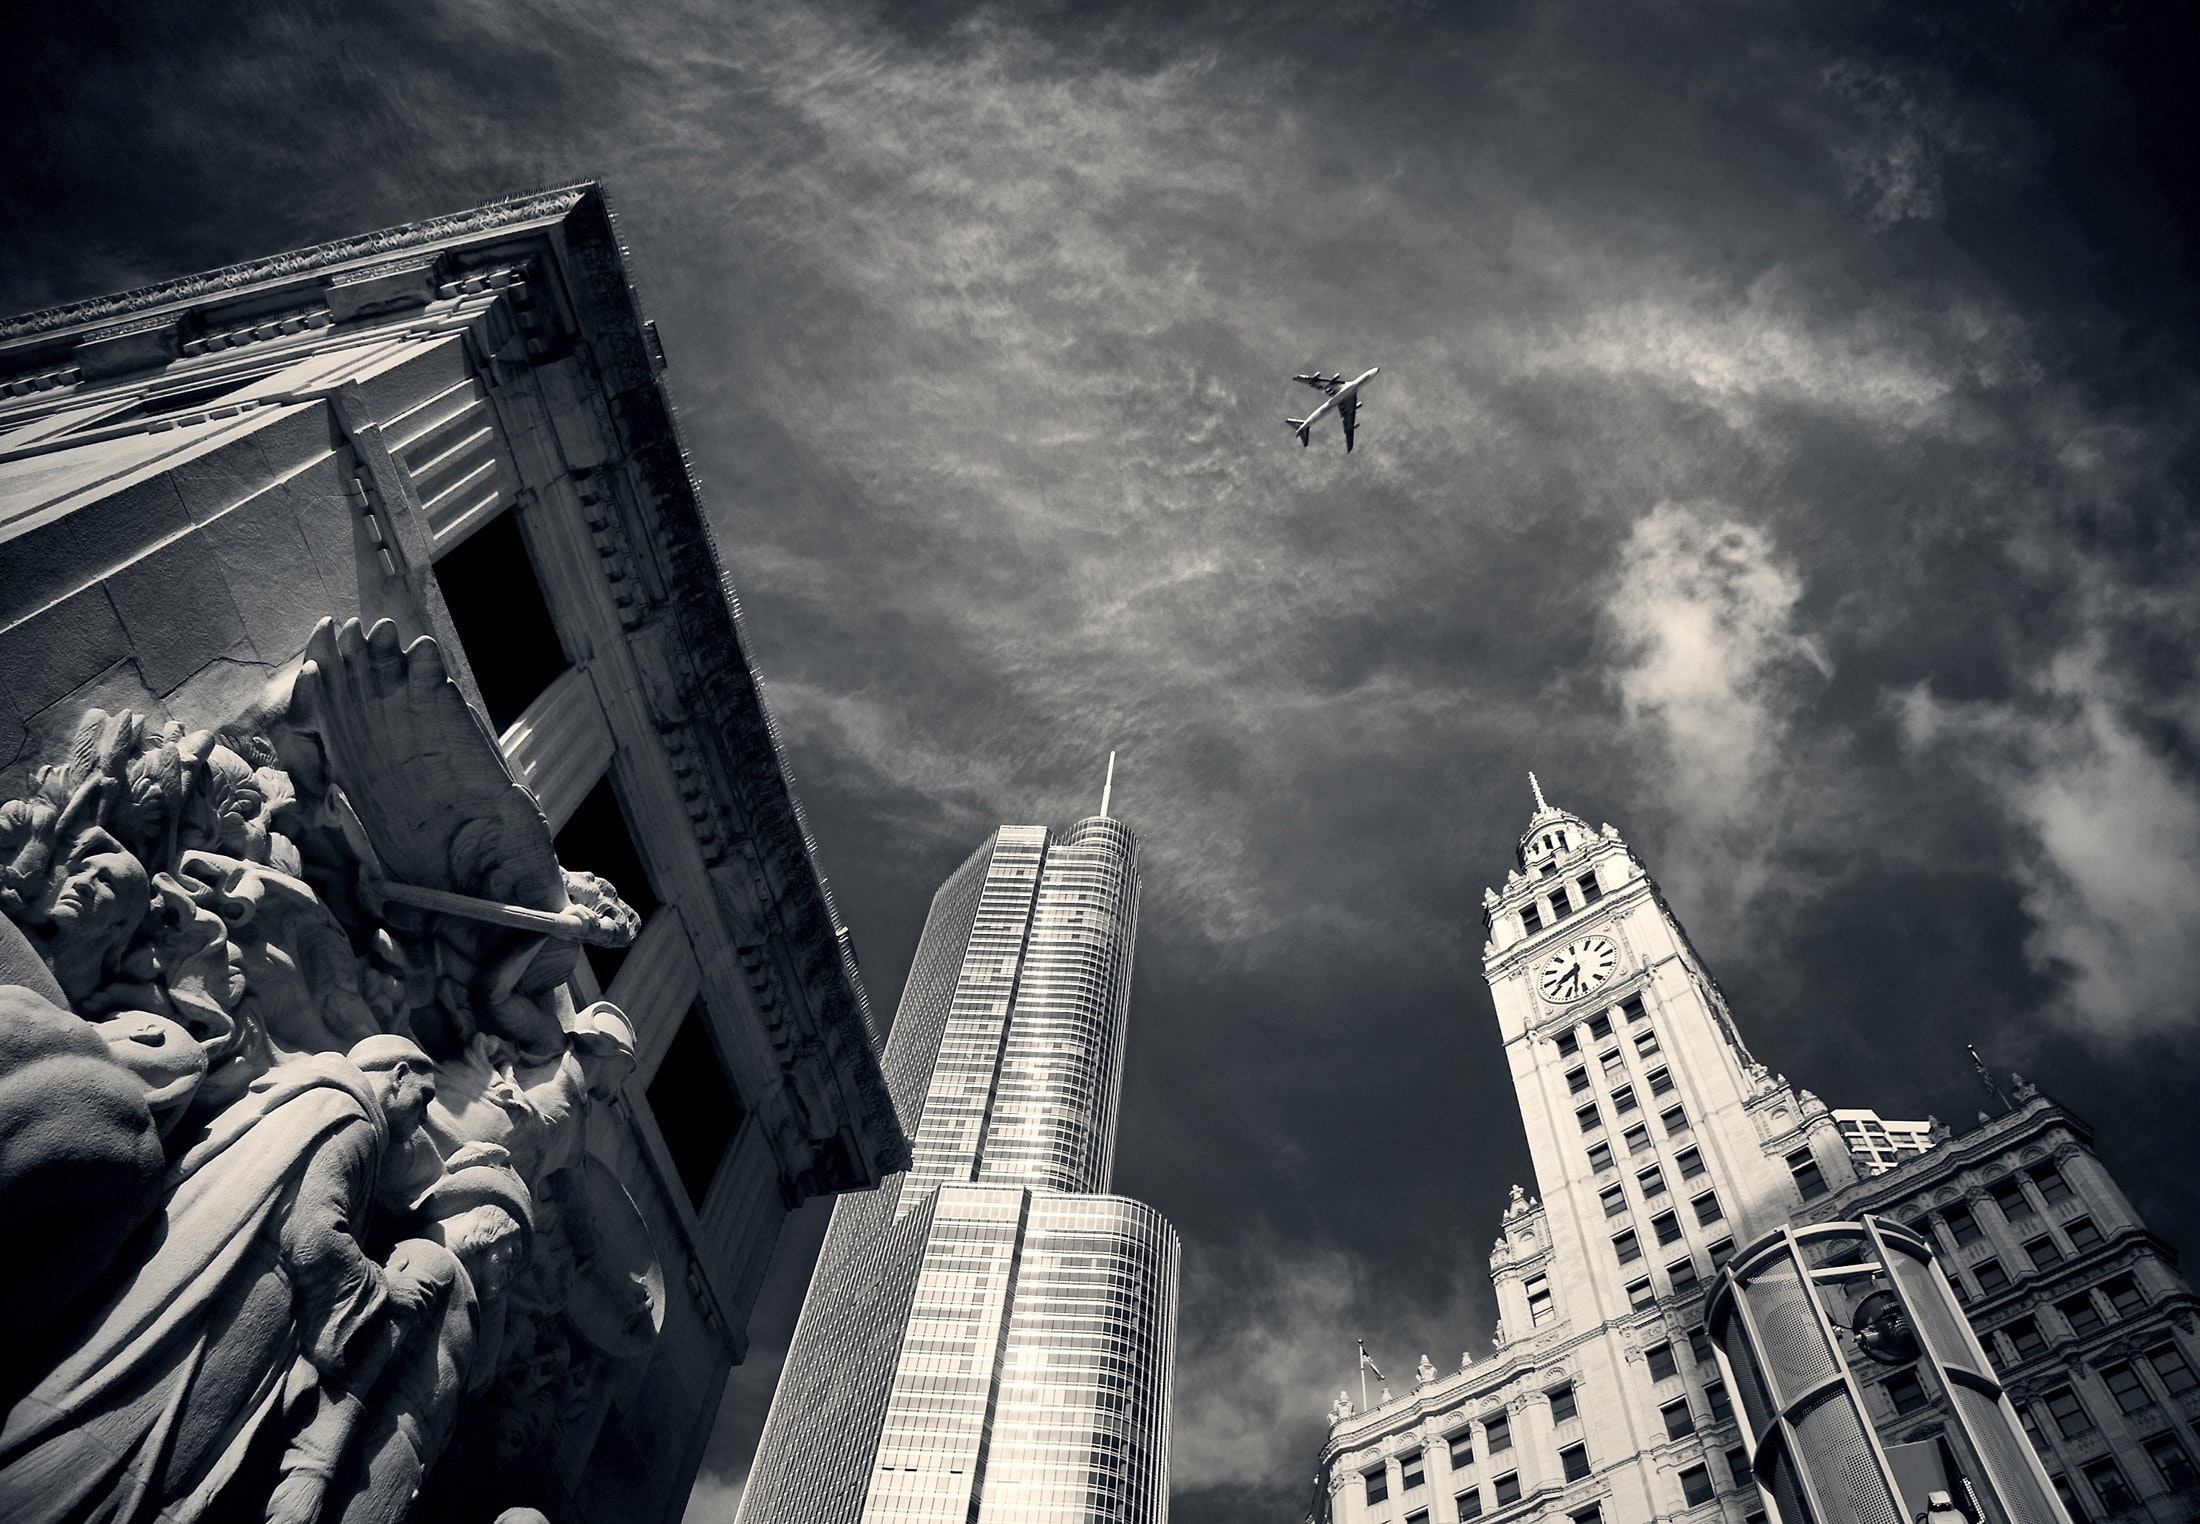 Air Plane Flying over Concrete Buildings and Statues in Grayscale Photography, Aeroplane, Airplane, Architecture, Black-and-white, HQ Photo